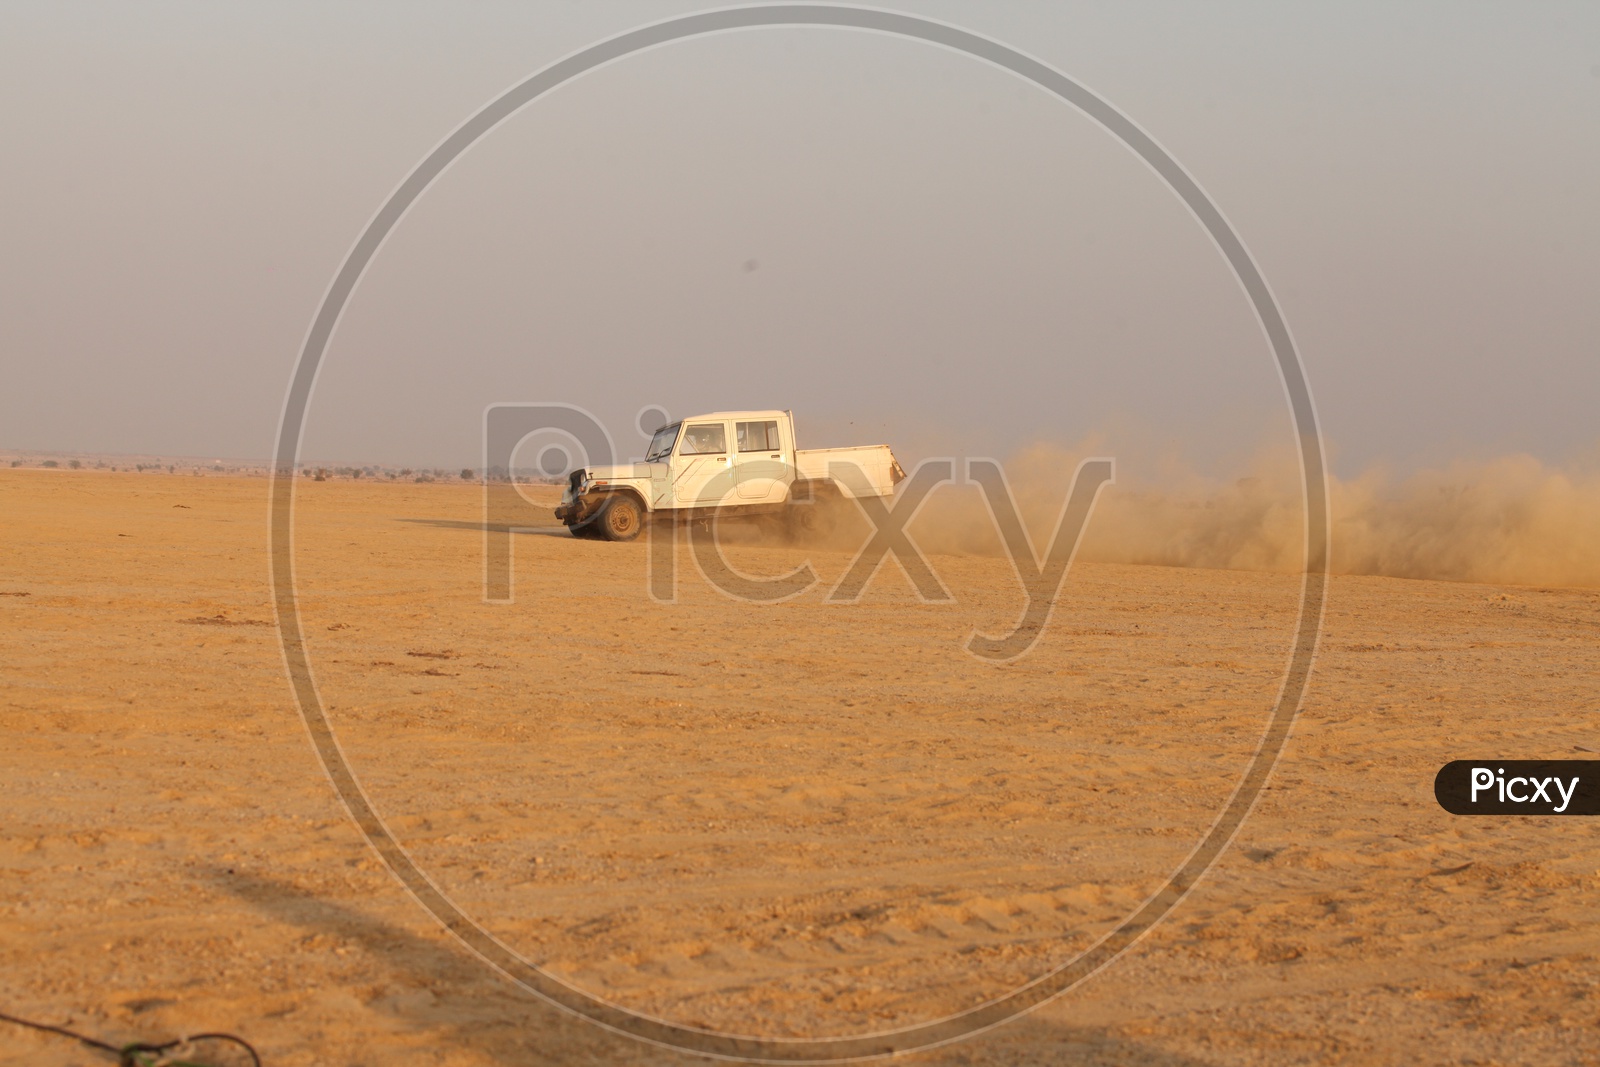 A vehicle moving in a desert